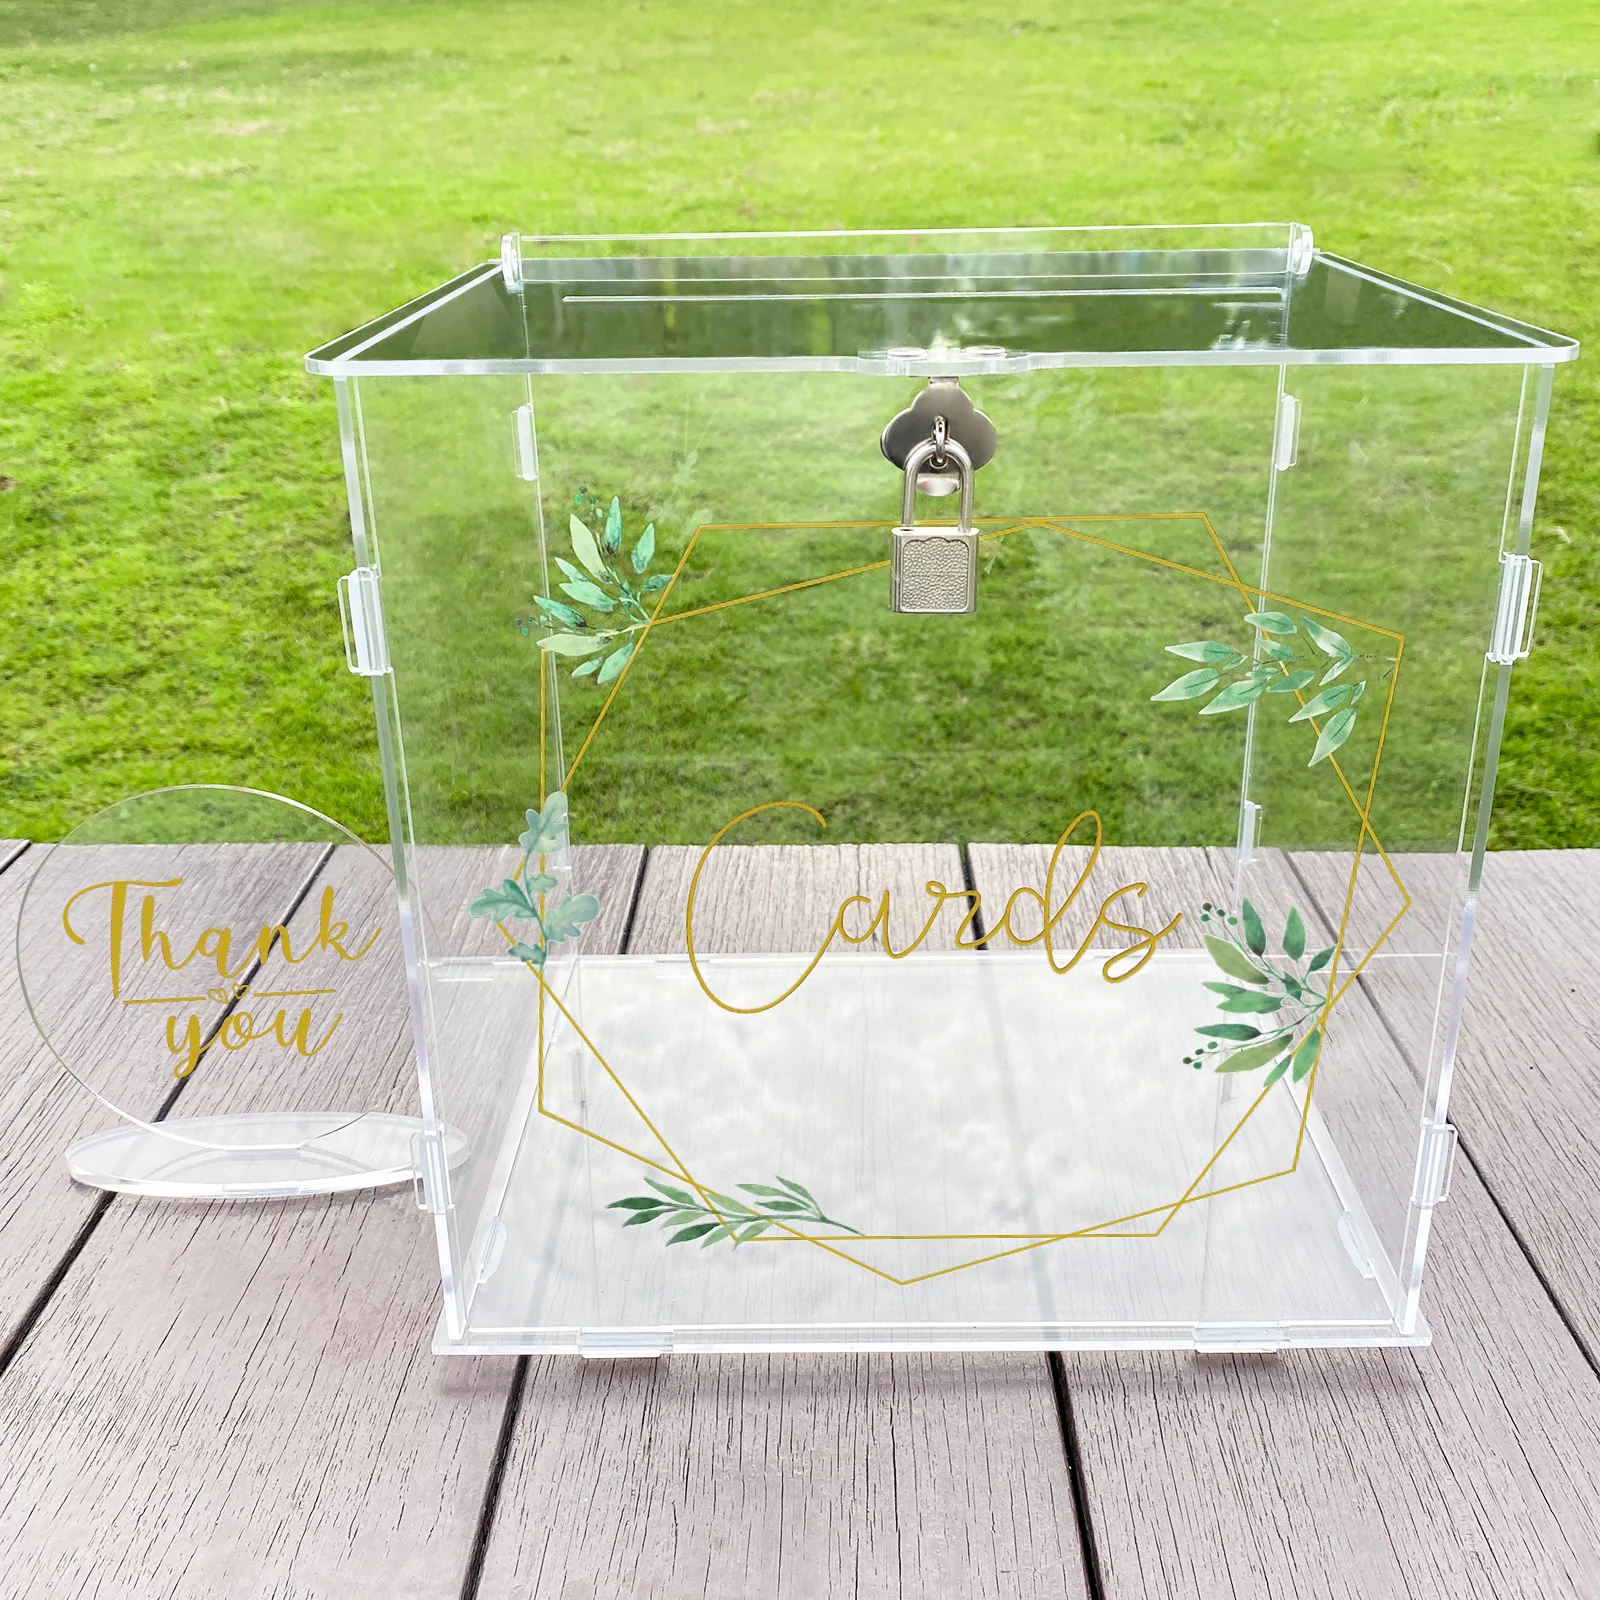 OurWarm Acrylic Wedding Card Box with Lock Gift Money Card Box for Party Graduation Birthday Baby Shower Decorations